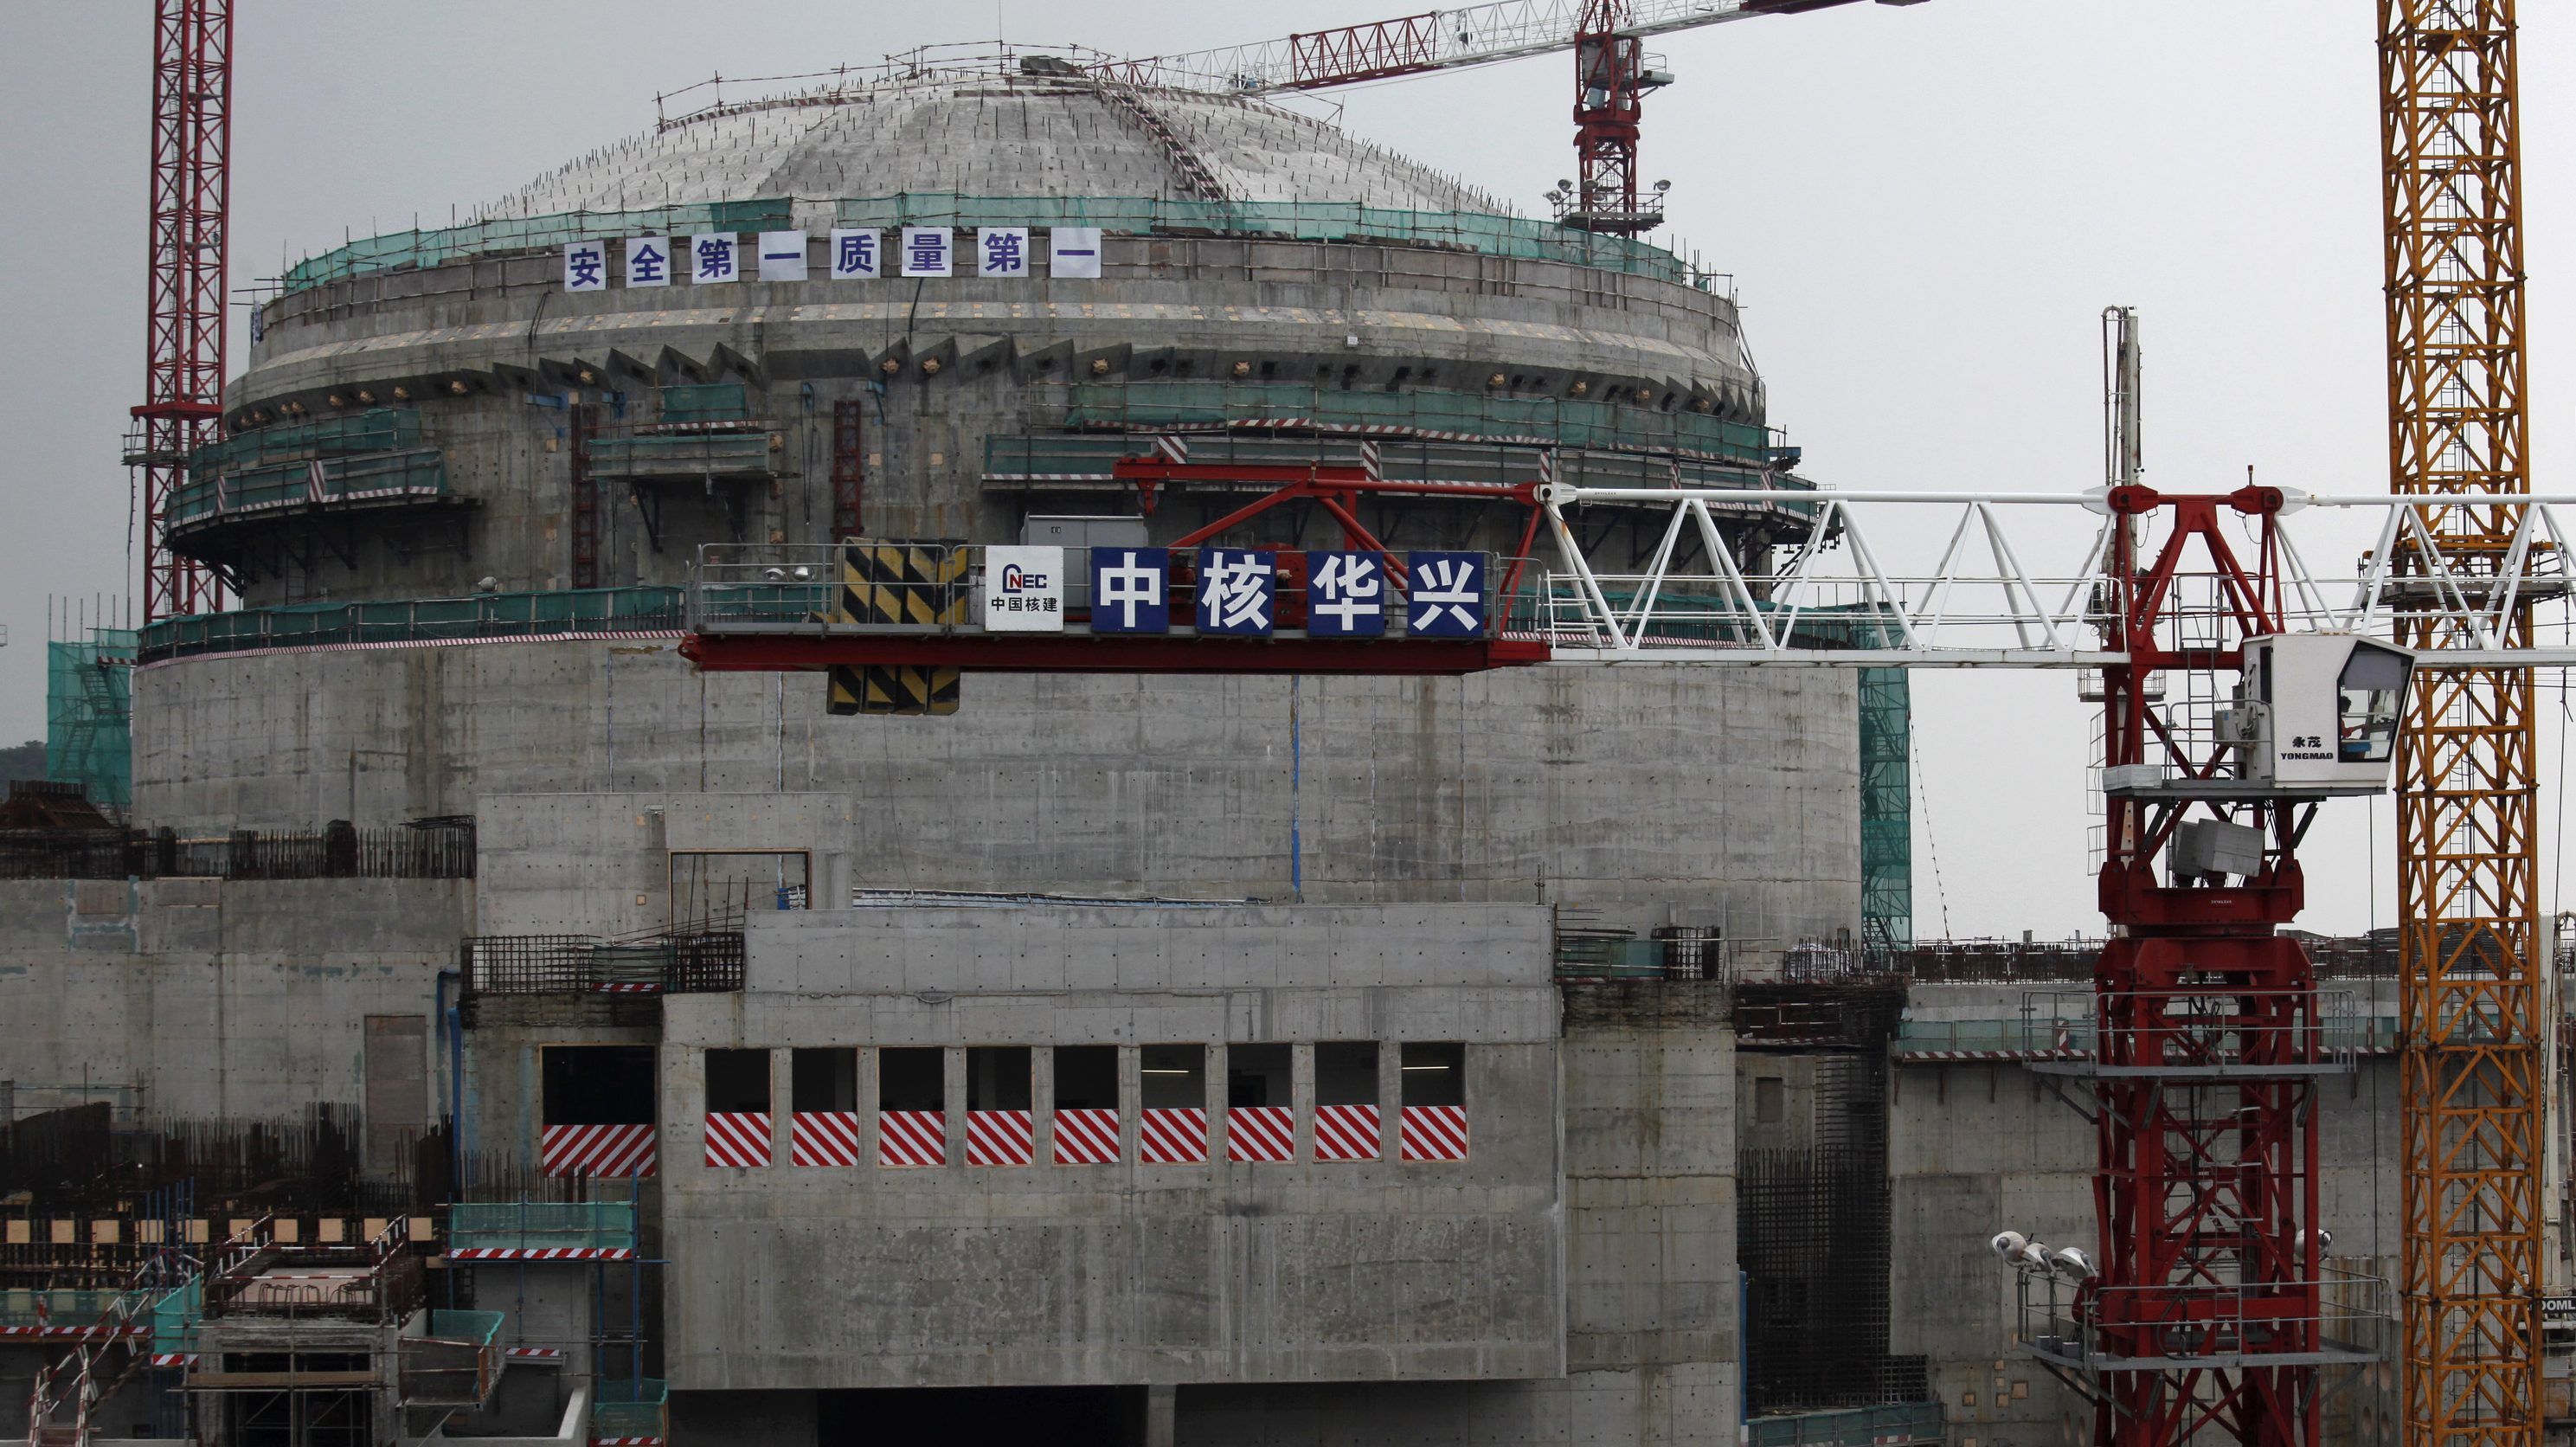 What we know about safety concerns at a Chinese nuclear power plant